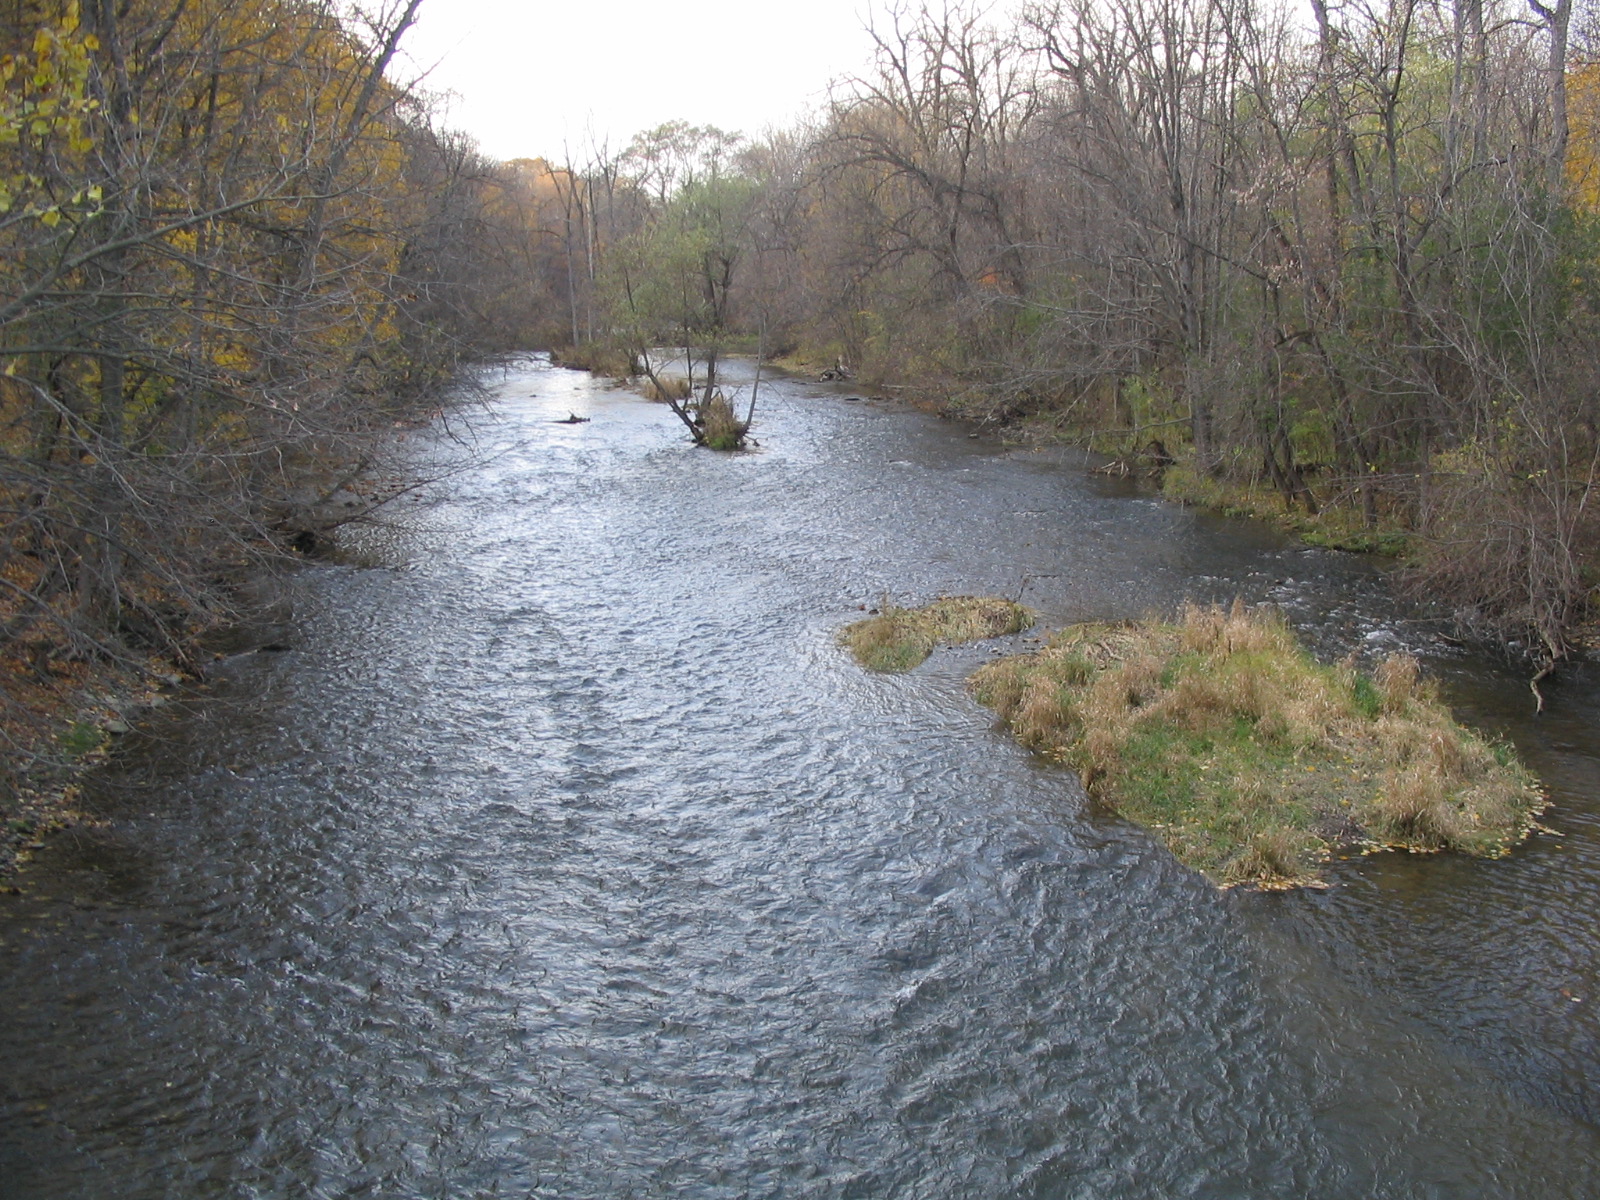 Photograph of the Oatka Creek at Garbutt, NY (GRBN6) looking downstream